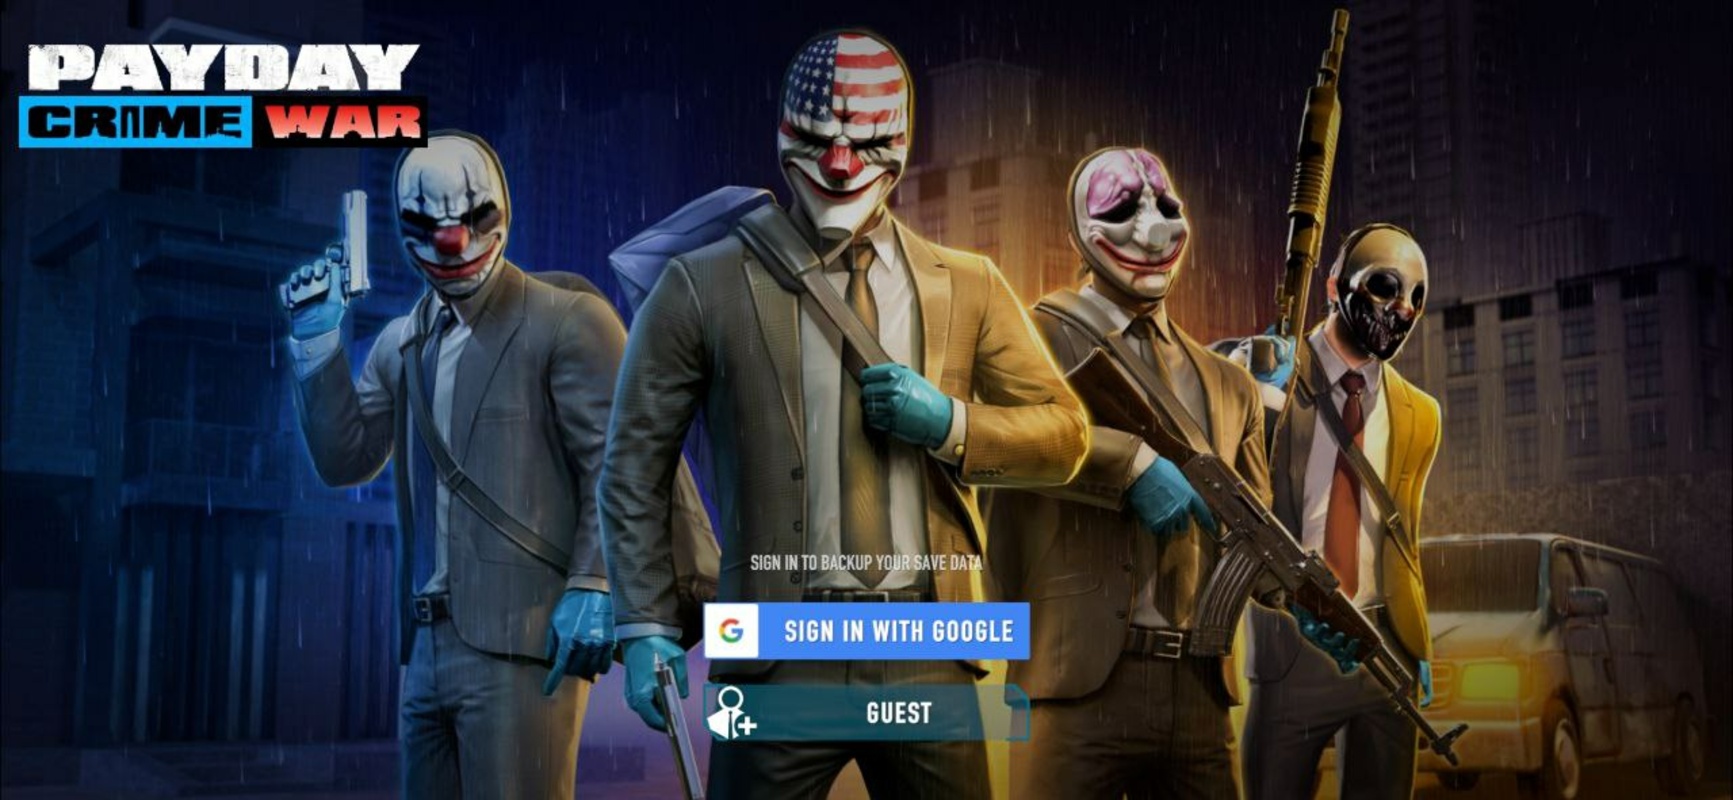 PAYDAY: Crime War 2022.0.11 APK feature